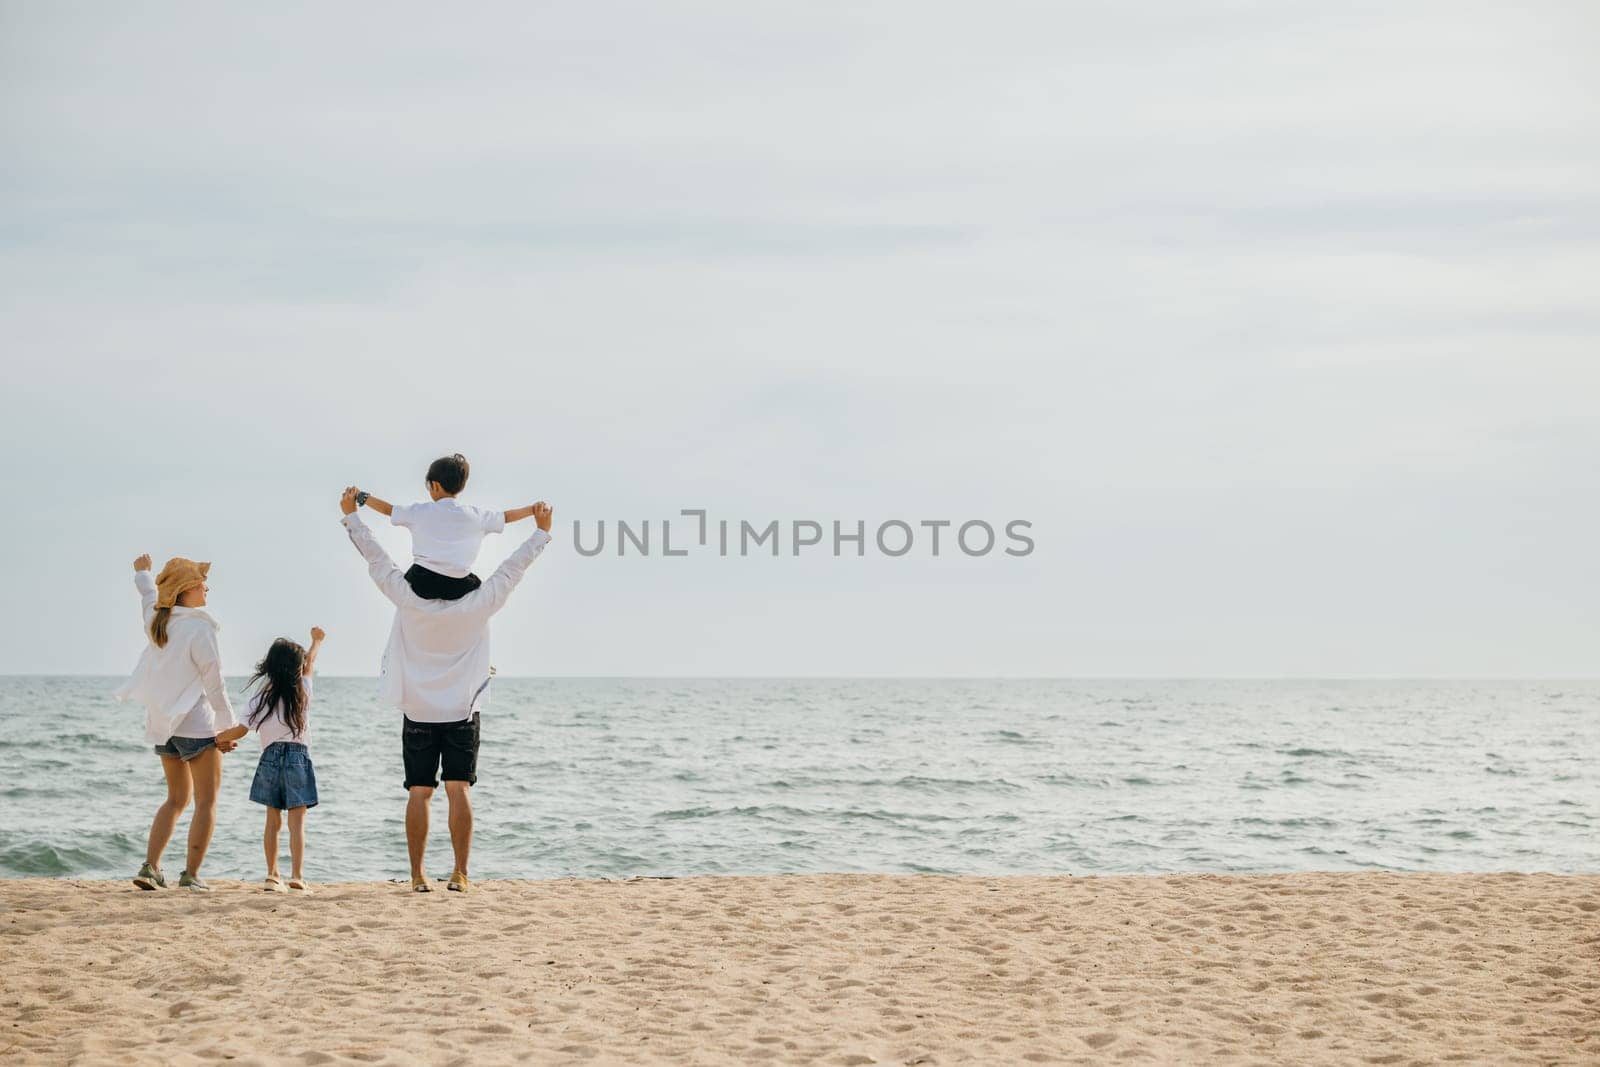 A happy family with raised arms stands on the sea beach at sunset. The father carrying his son on shoulders signifies the carefree joy and togetherness of a perfect beach vacation.